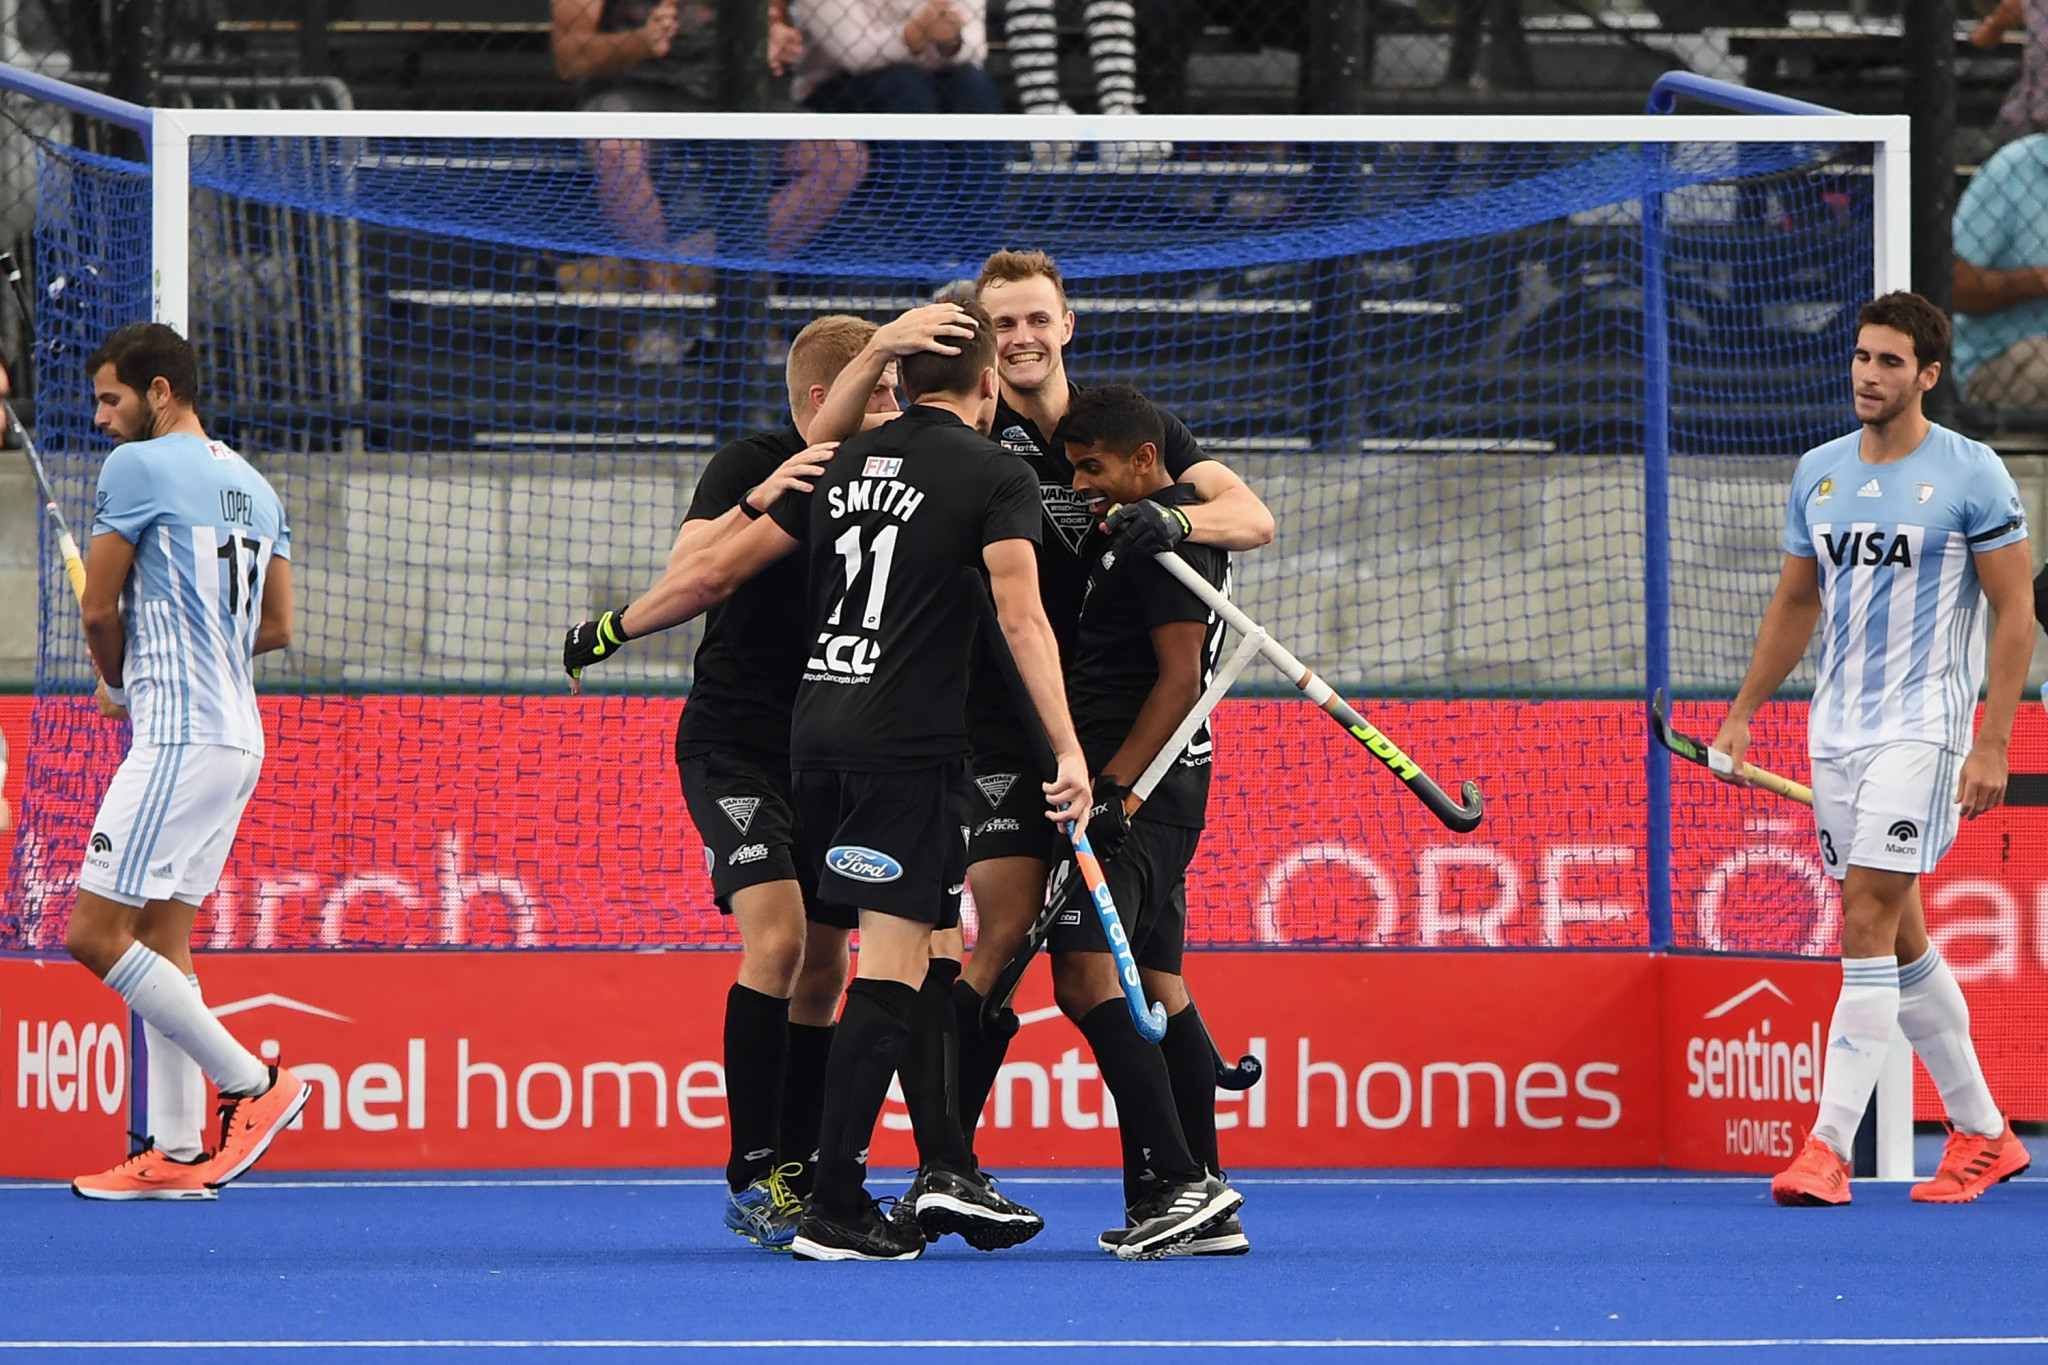 New Zealand won 5-3 in their men's match in Christchurch ©Getty Images